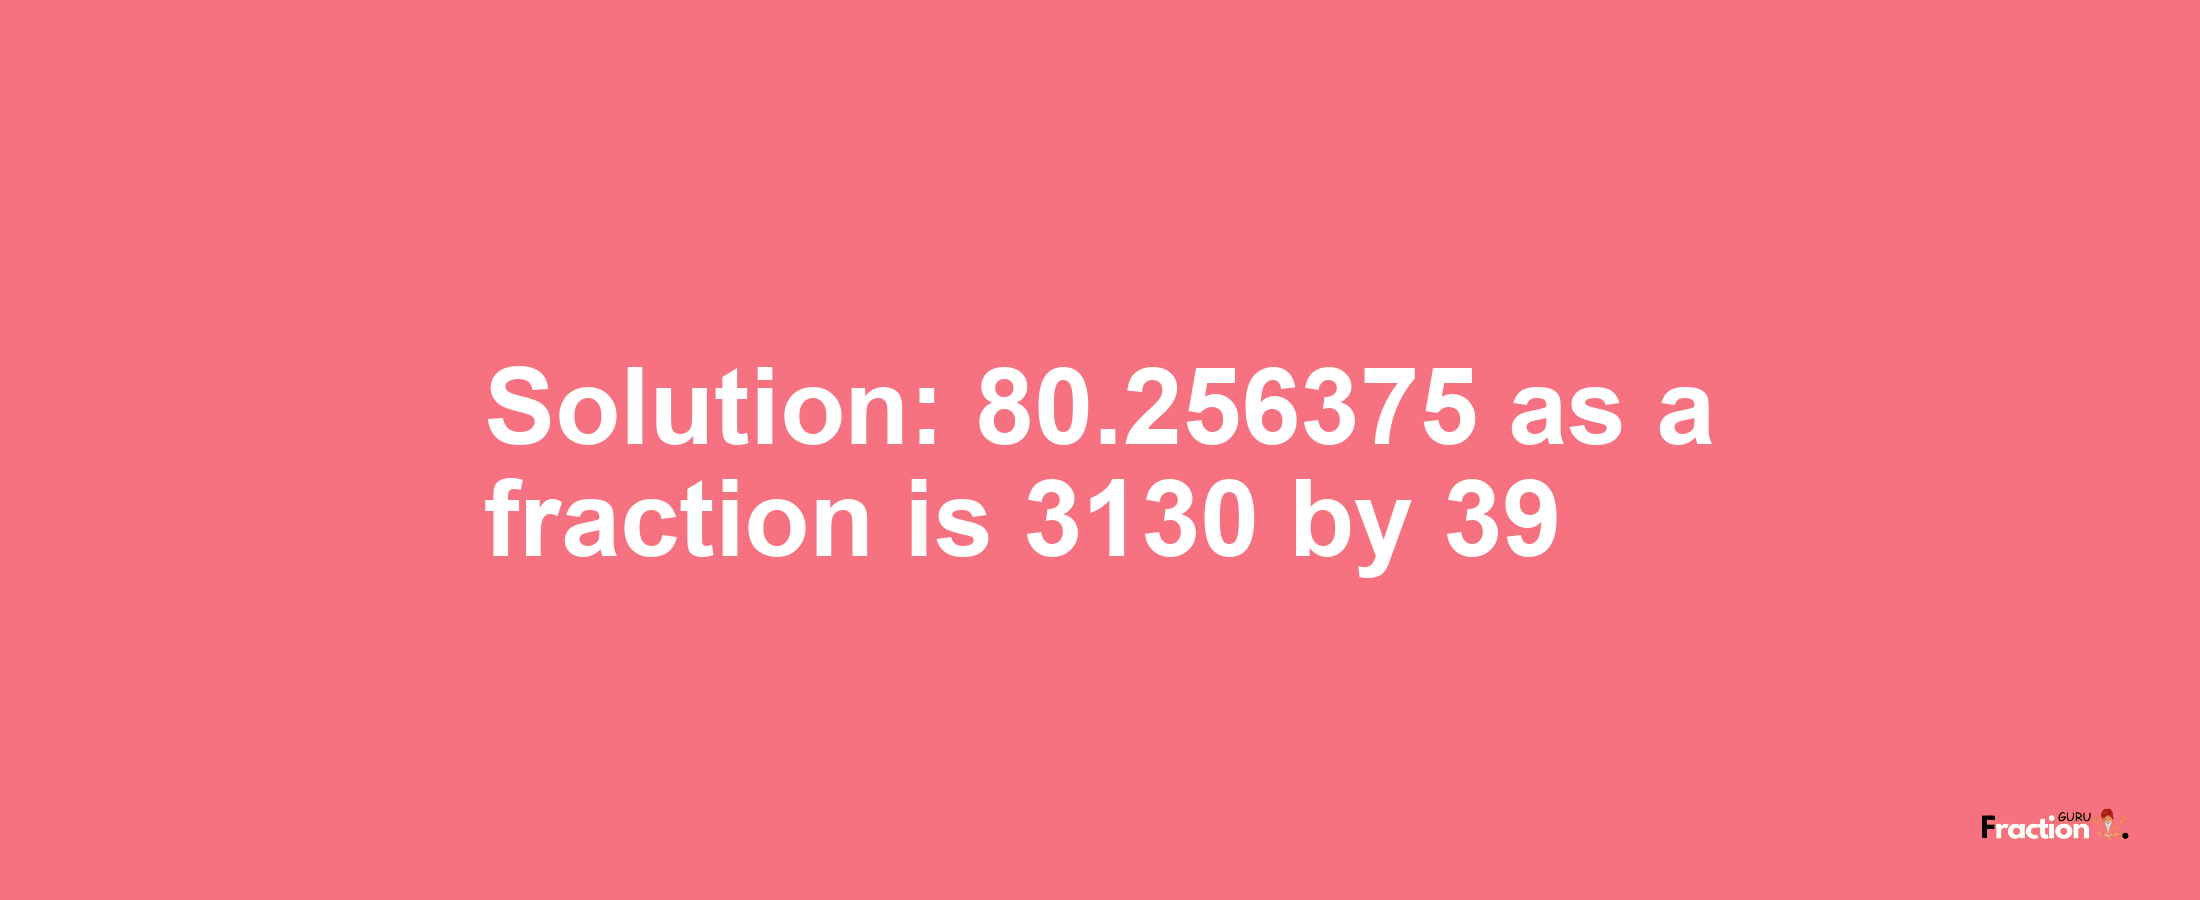 Solution:80.256375 as a fraction is 3130/39